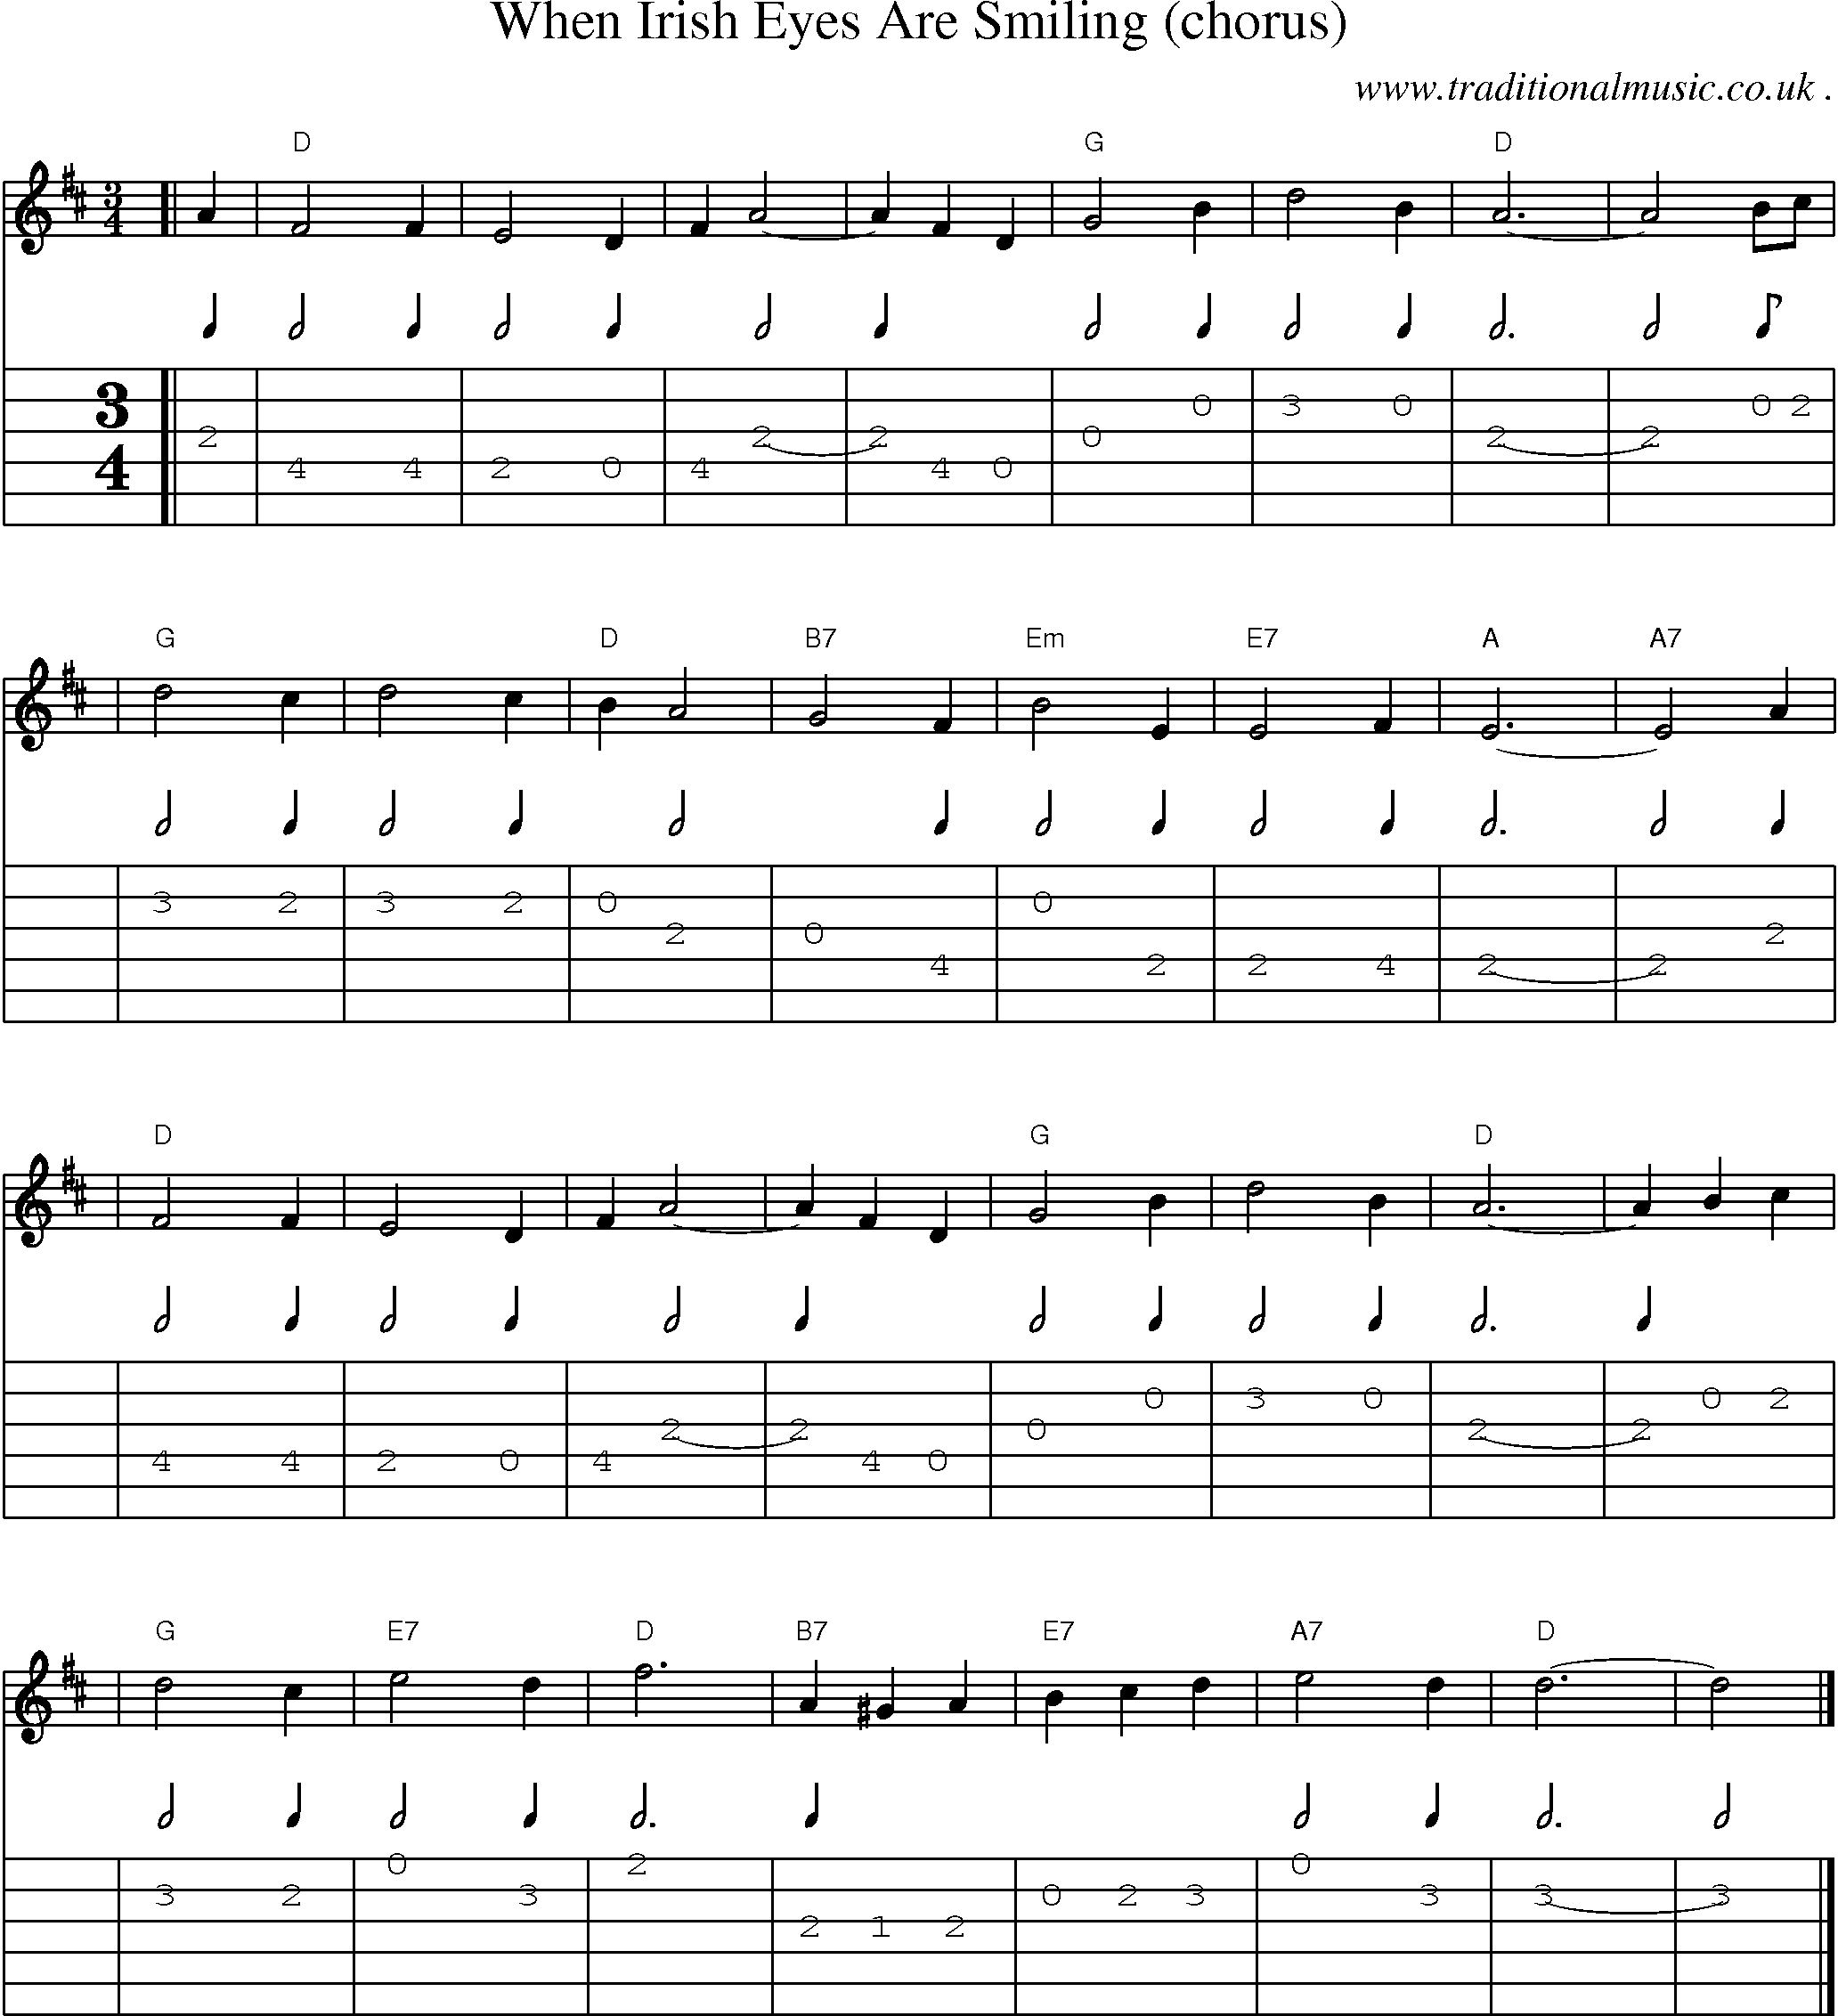 Sheet-music  score, Chords and Guitar Tabs for When Irish Eyes Are Smiling Chorus